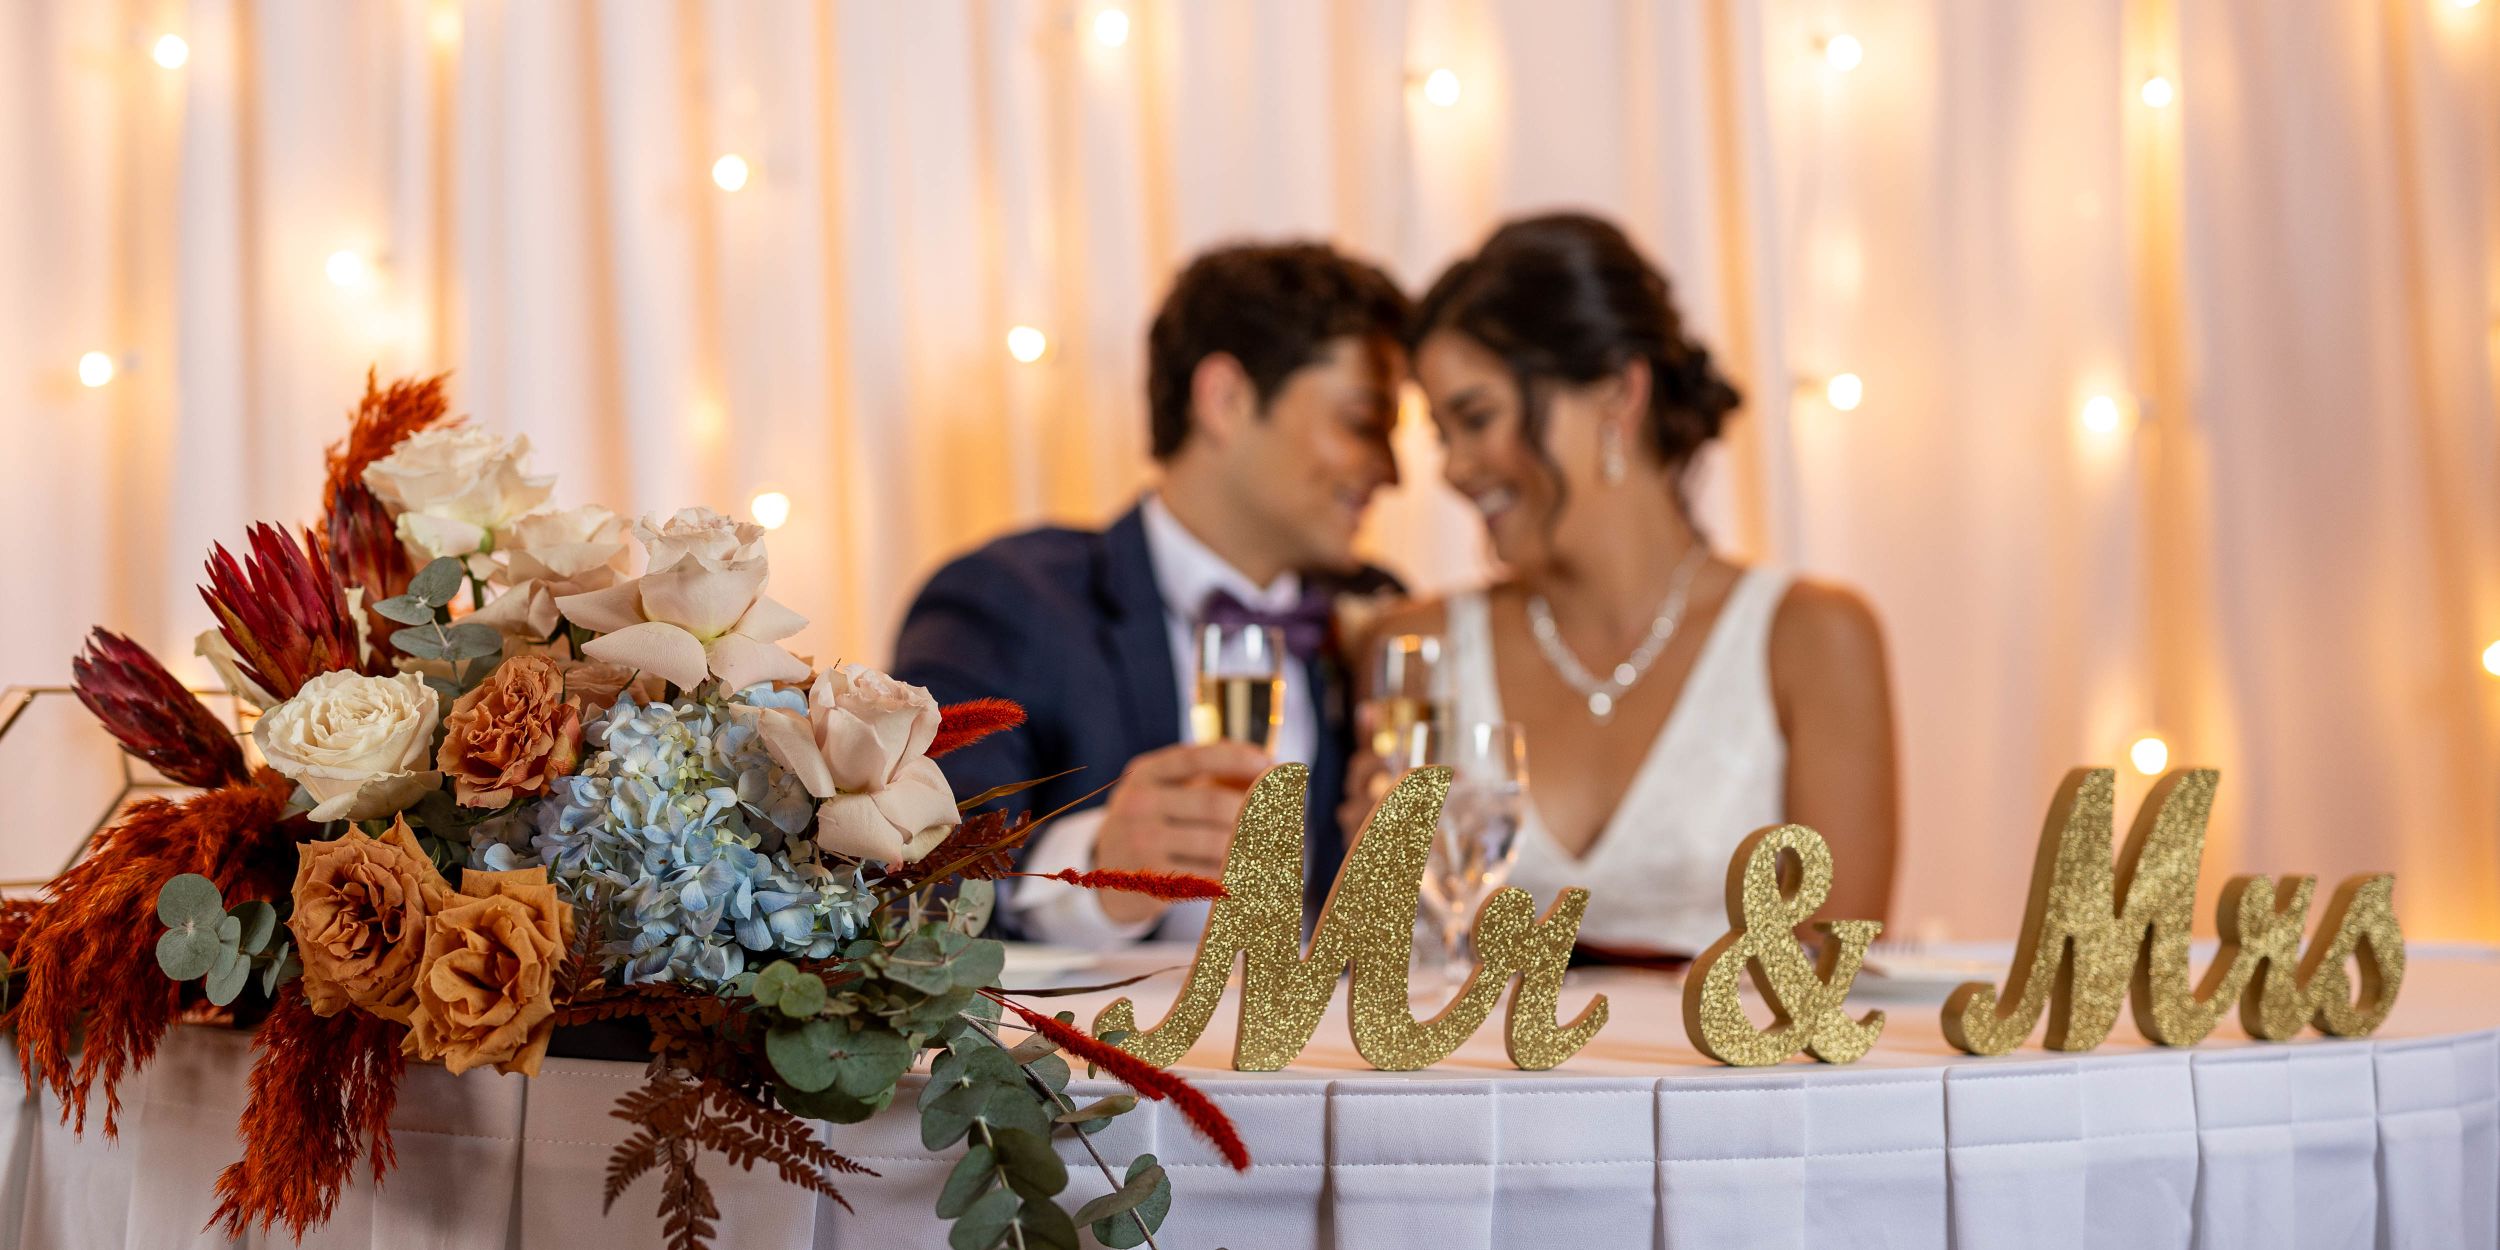 A Bride And Groom Sitting At A Table With Flowers